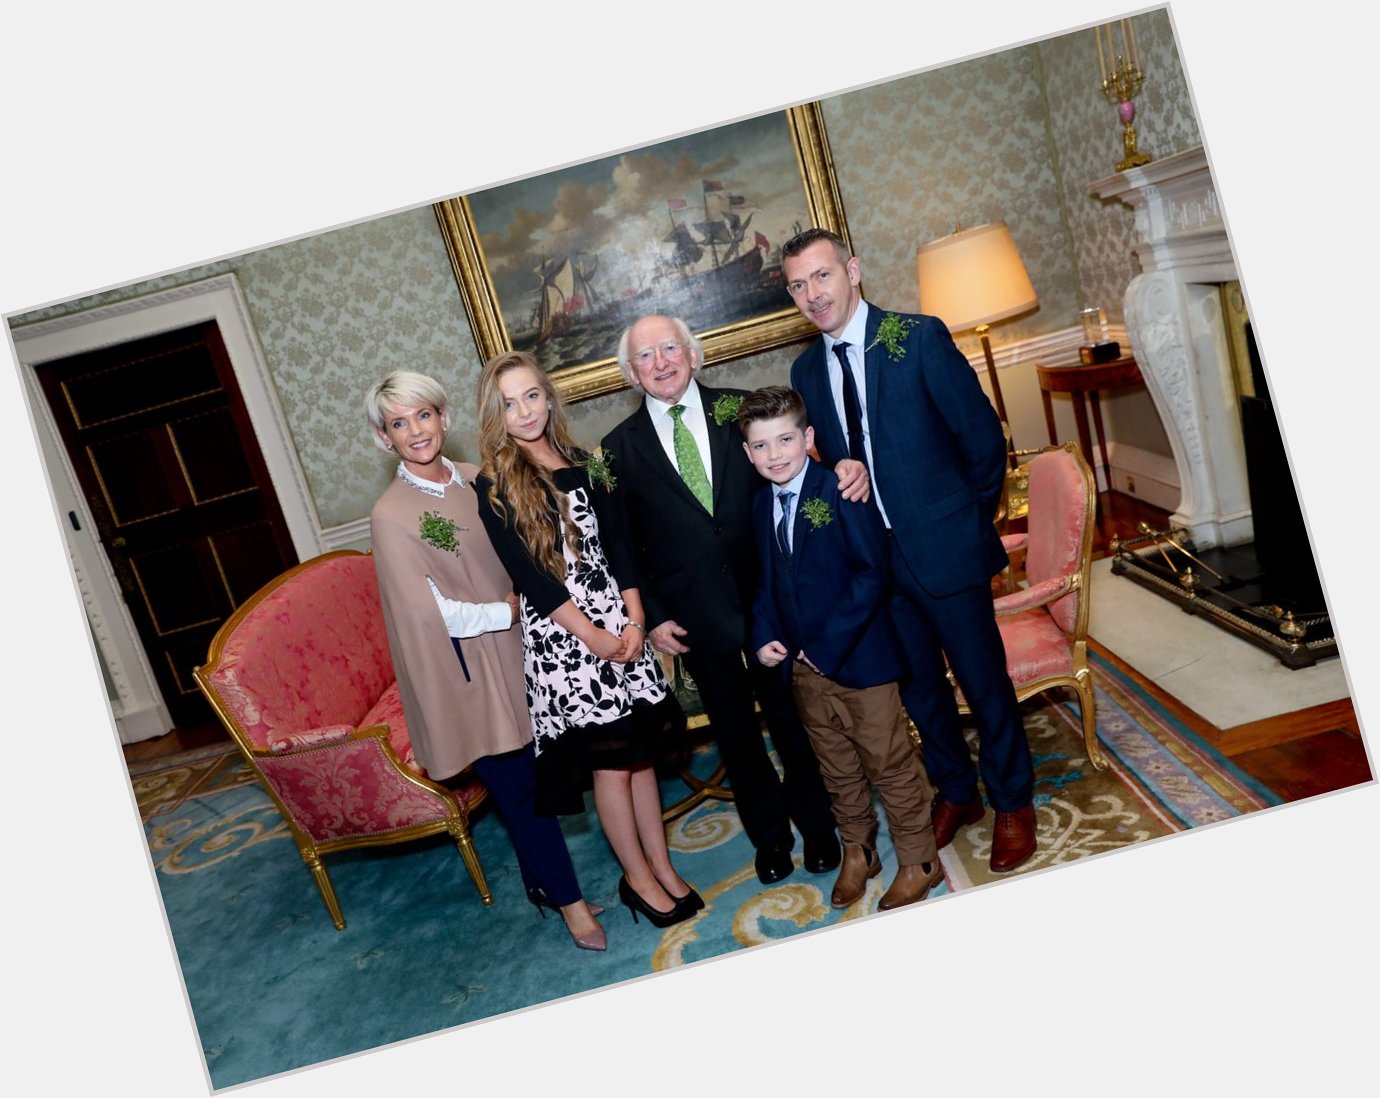 Happy birthday President Michael D Higgins from the Deehan family 